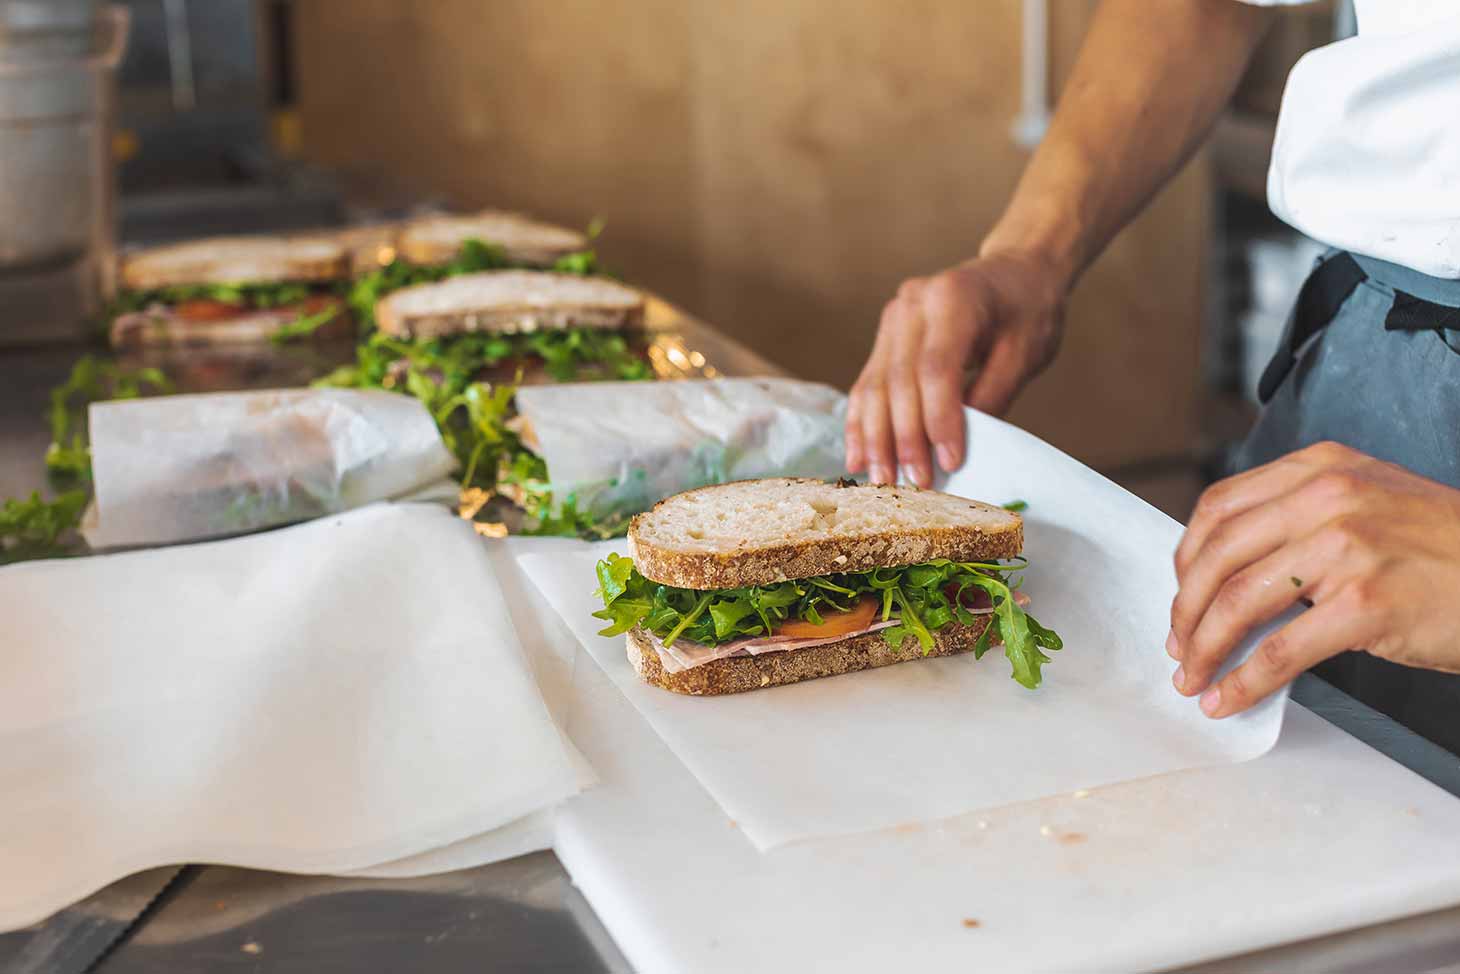 Freshly prepared sandwiches being wrapped by chef